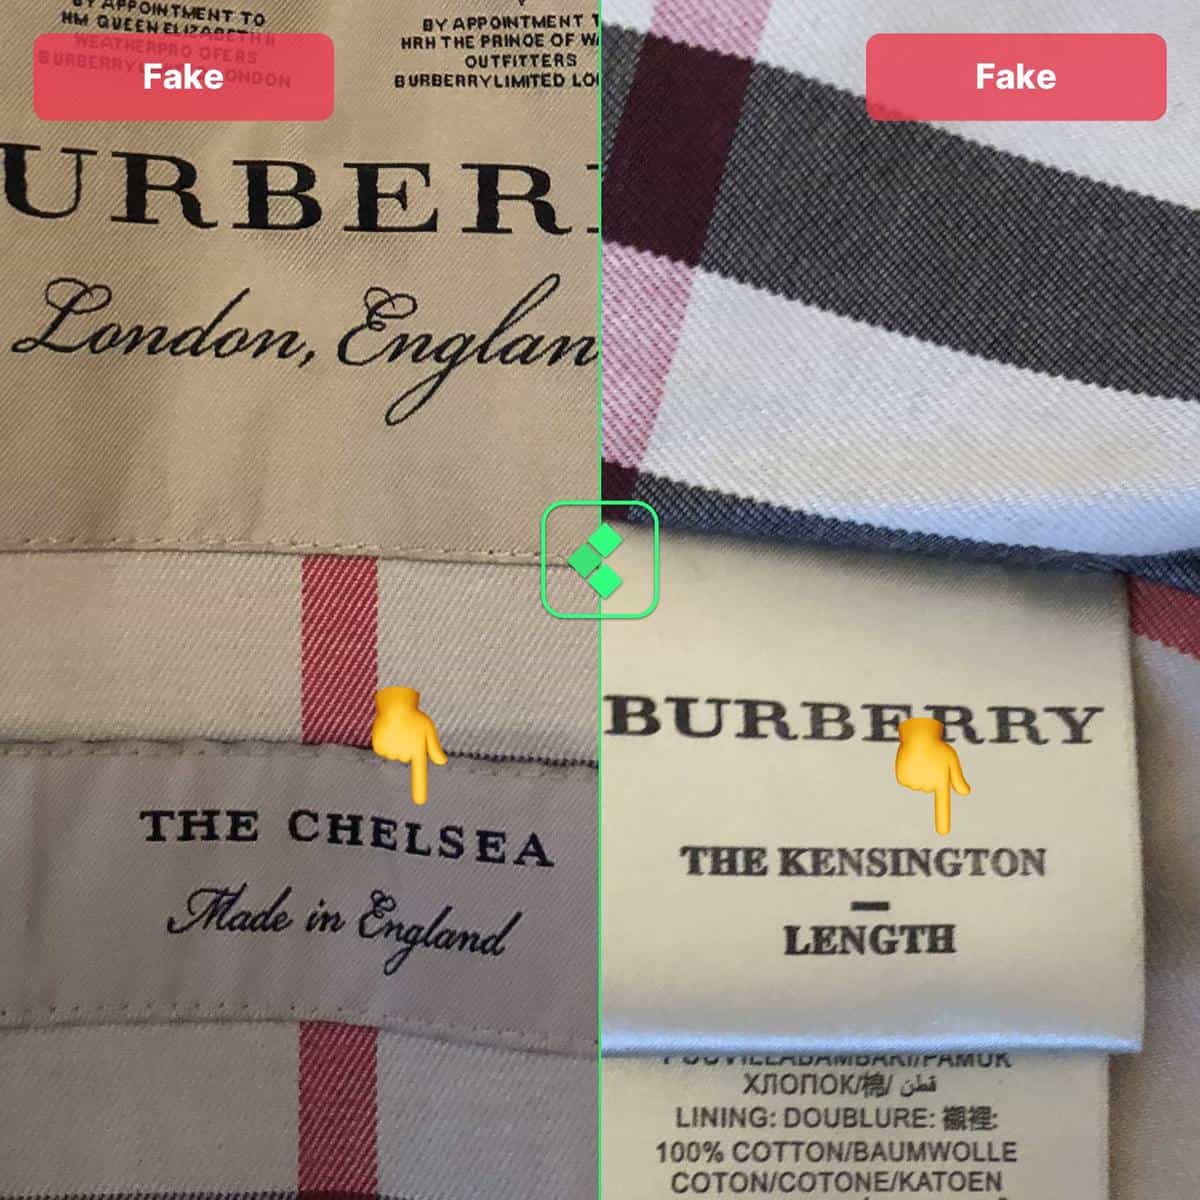 Smart Info About How To Spot A Fake Burberry Coat - Philosophypeter5